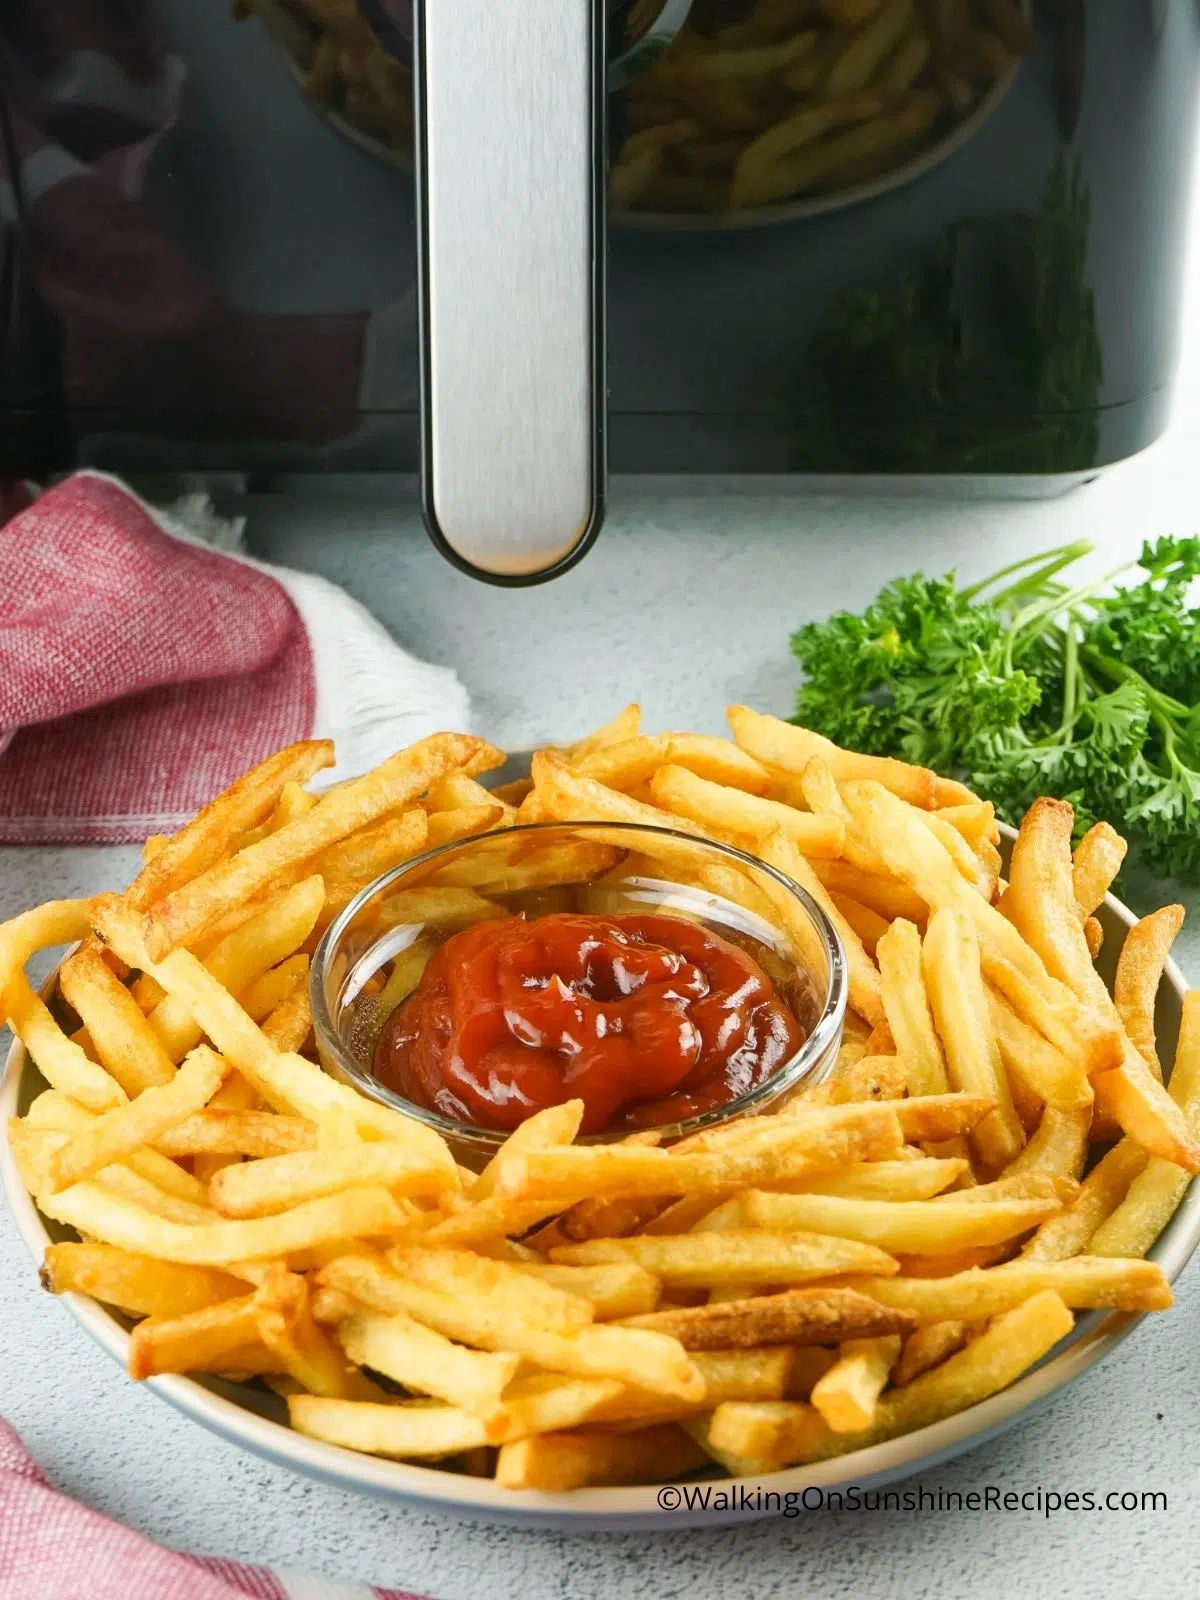 French Fries in bowl in front of air fryer.